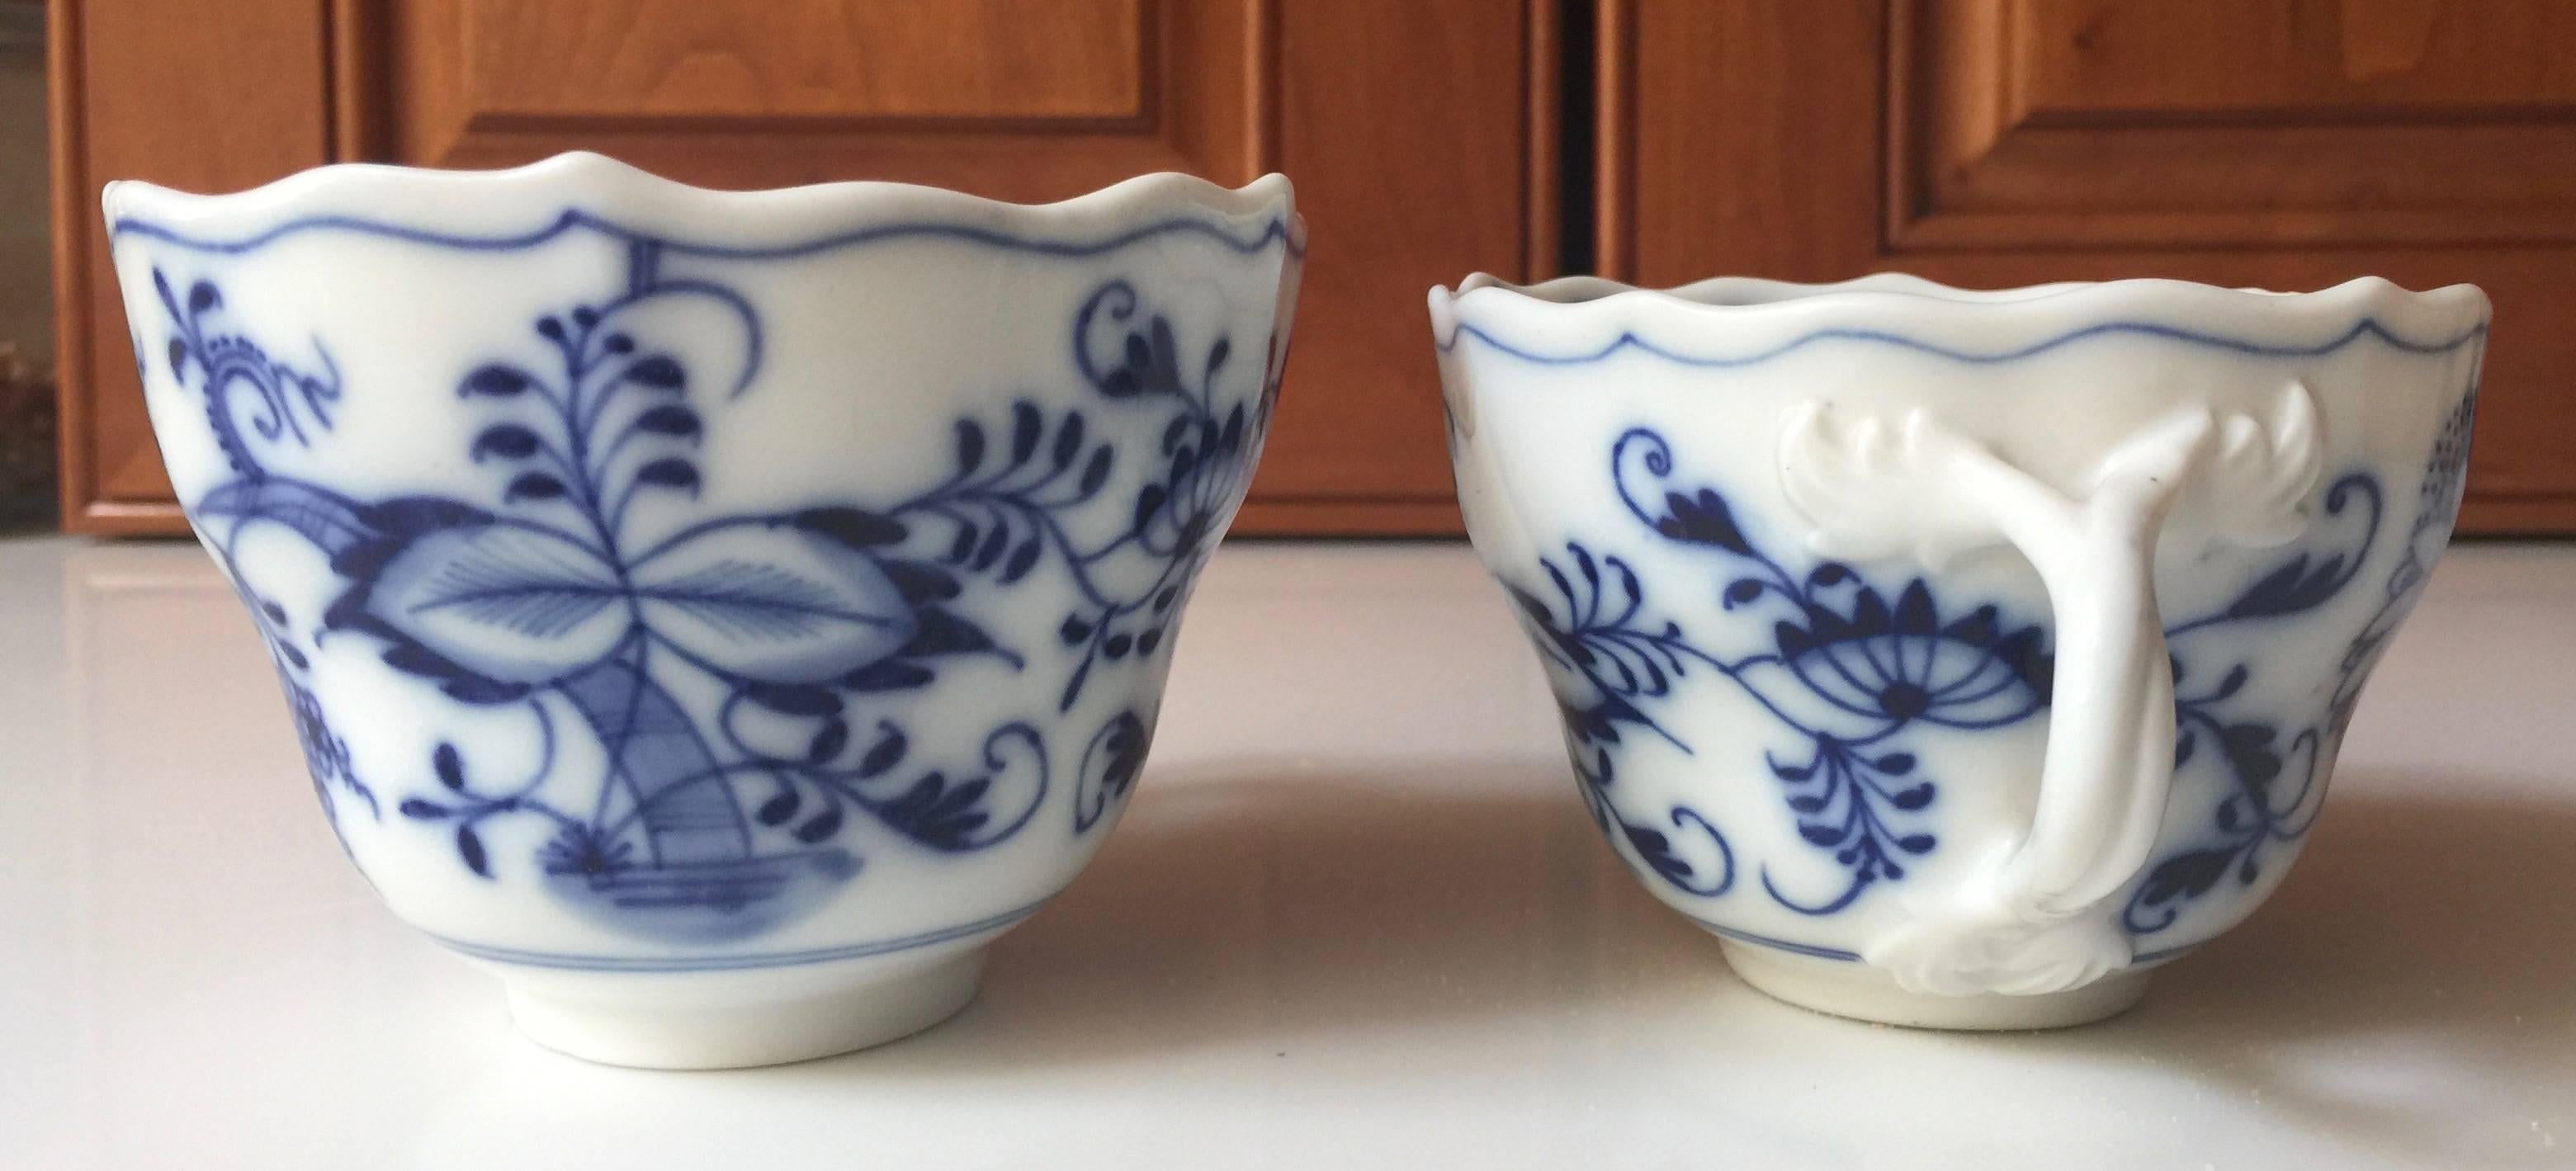 Meissen Blue Onion Cups and Saucers Set of Eight In Good Condition For Sale In Washington Crossing, PA